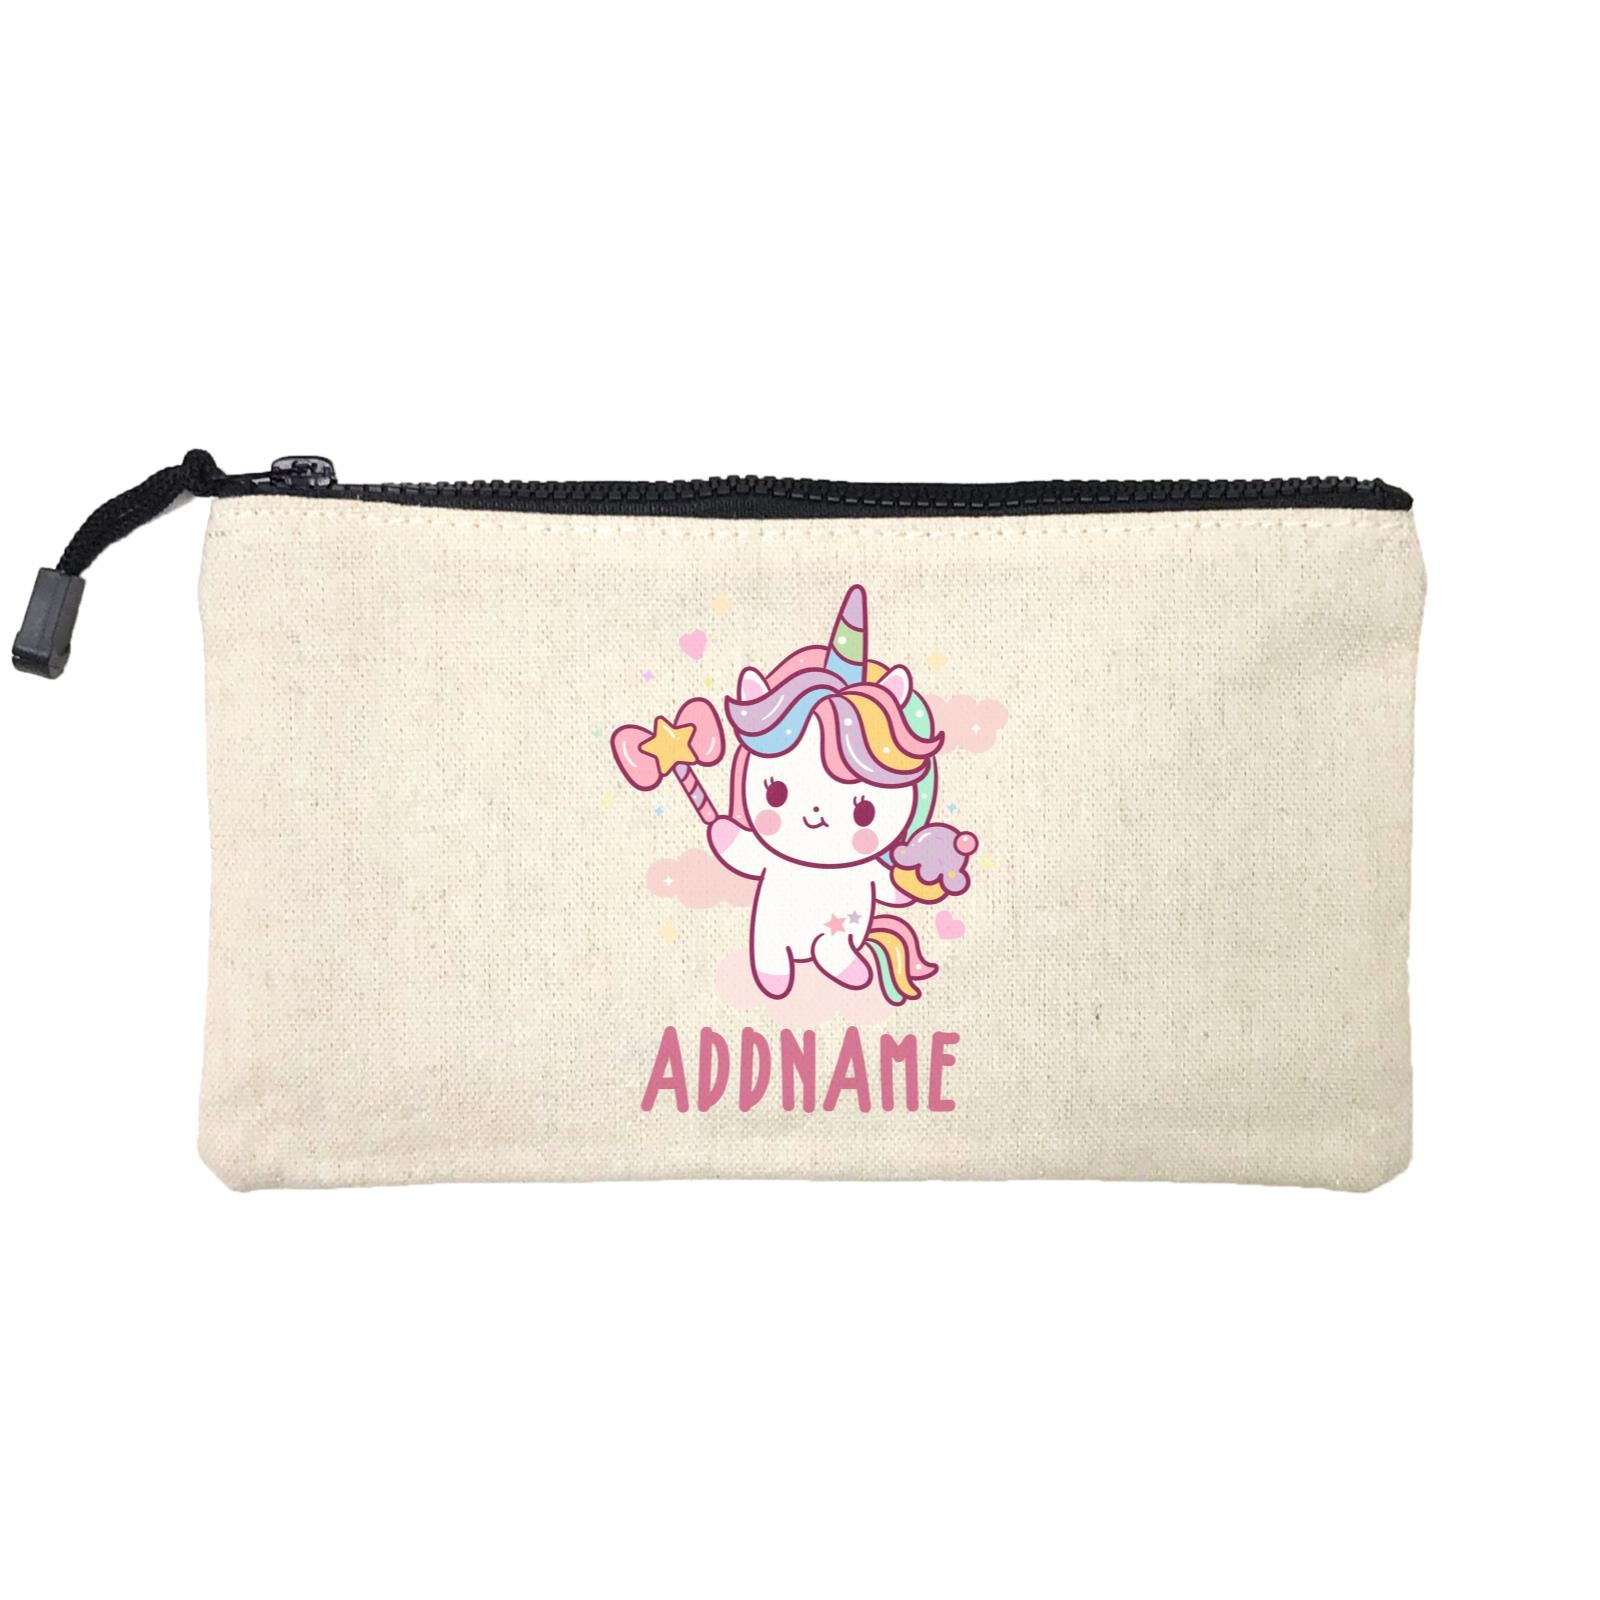 Unicorn And Princess Series Cute Unicorn With Wand Addname Mini Accessories Stationery Pouch